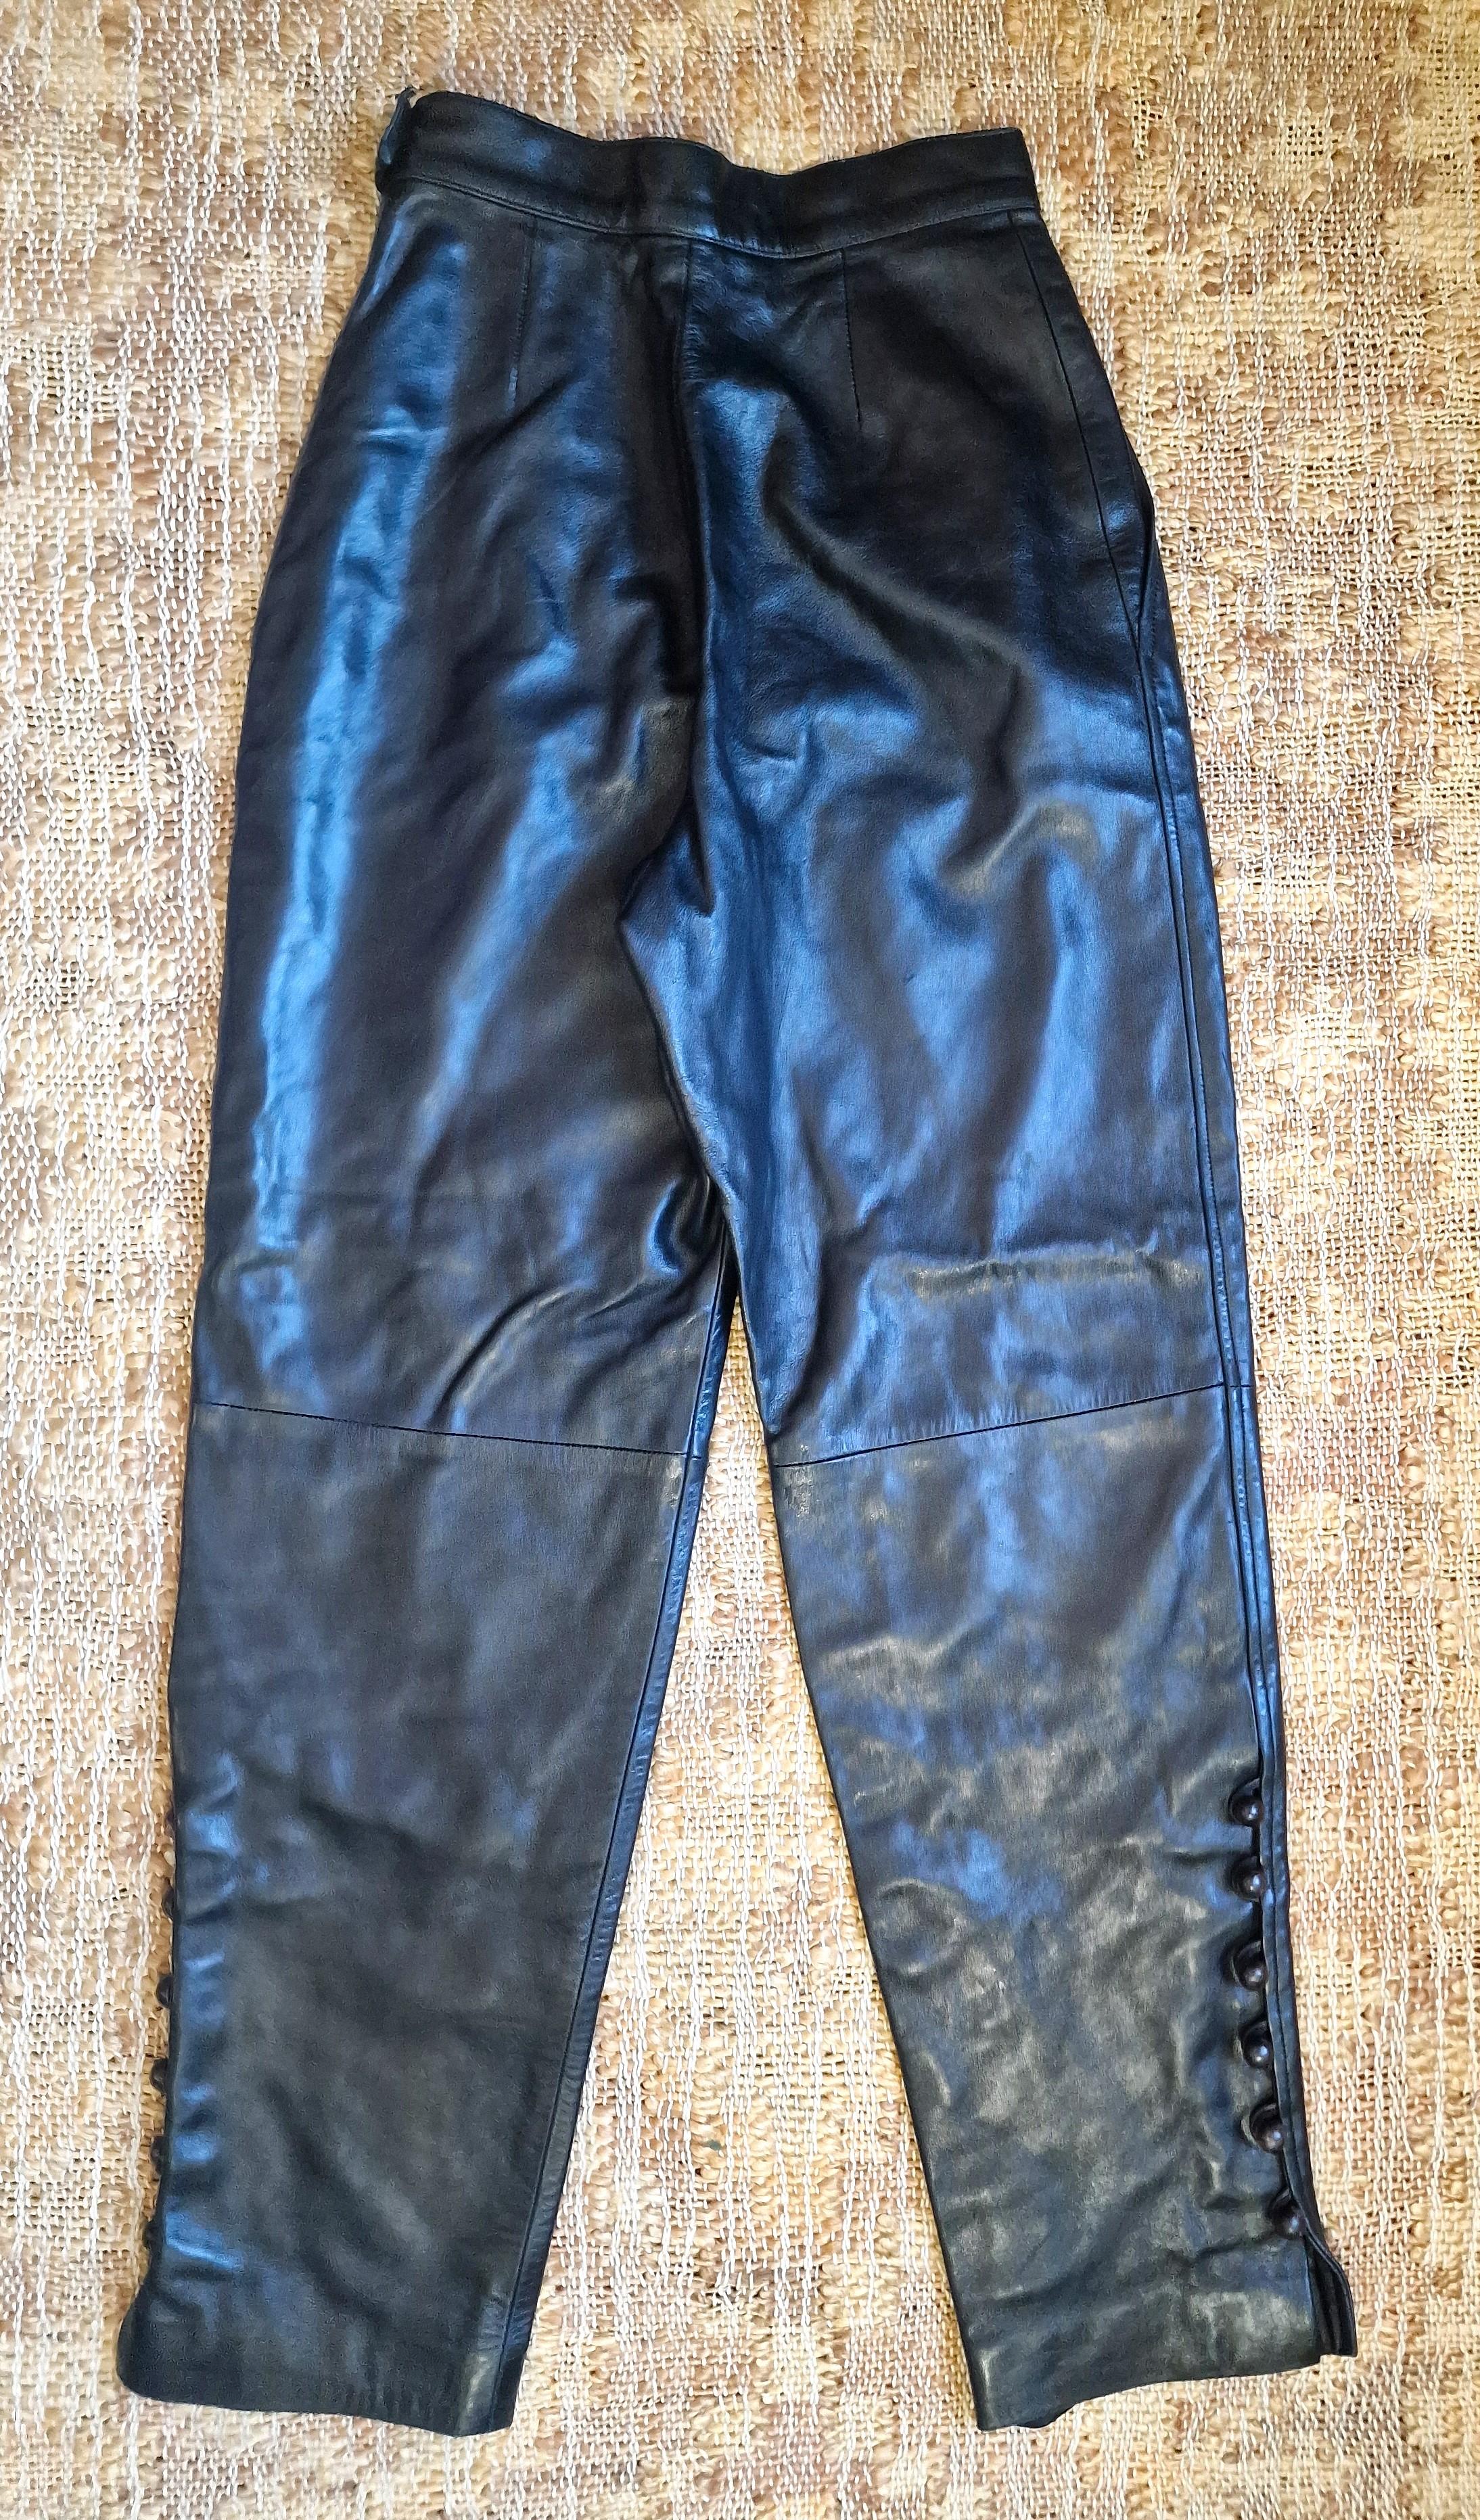 YSL Yves Saint Laurent Rive Gauche Leather High Waist Black Small Trousers Pants For Sale 6